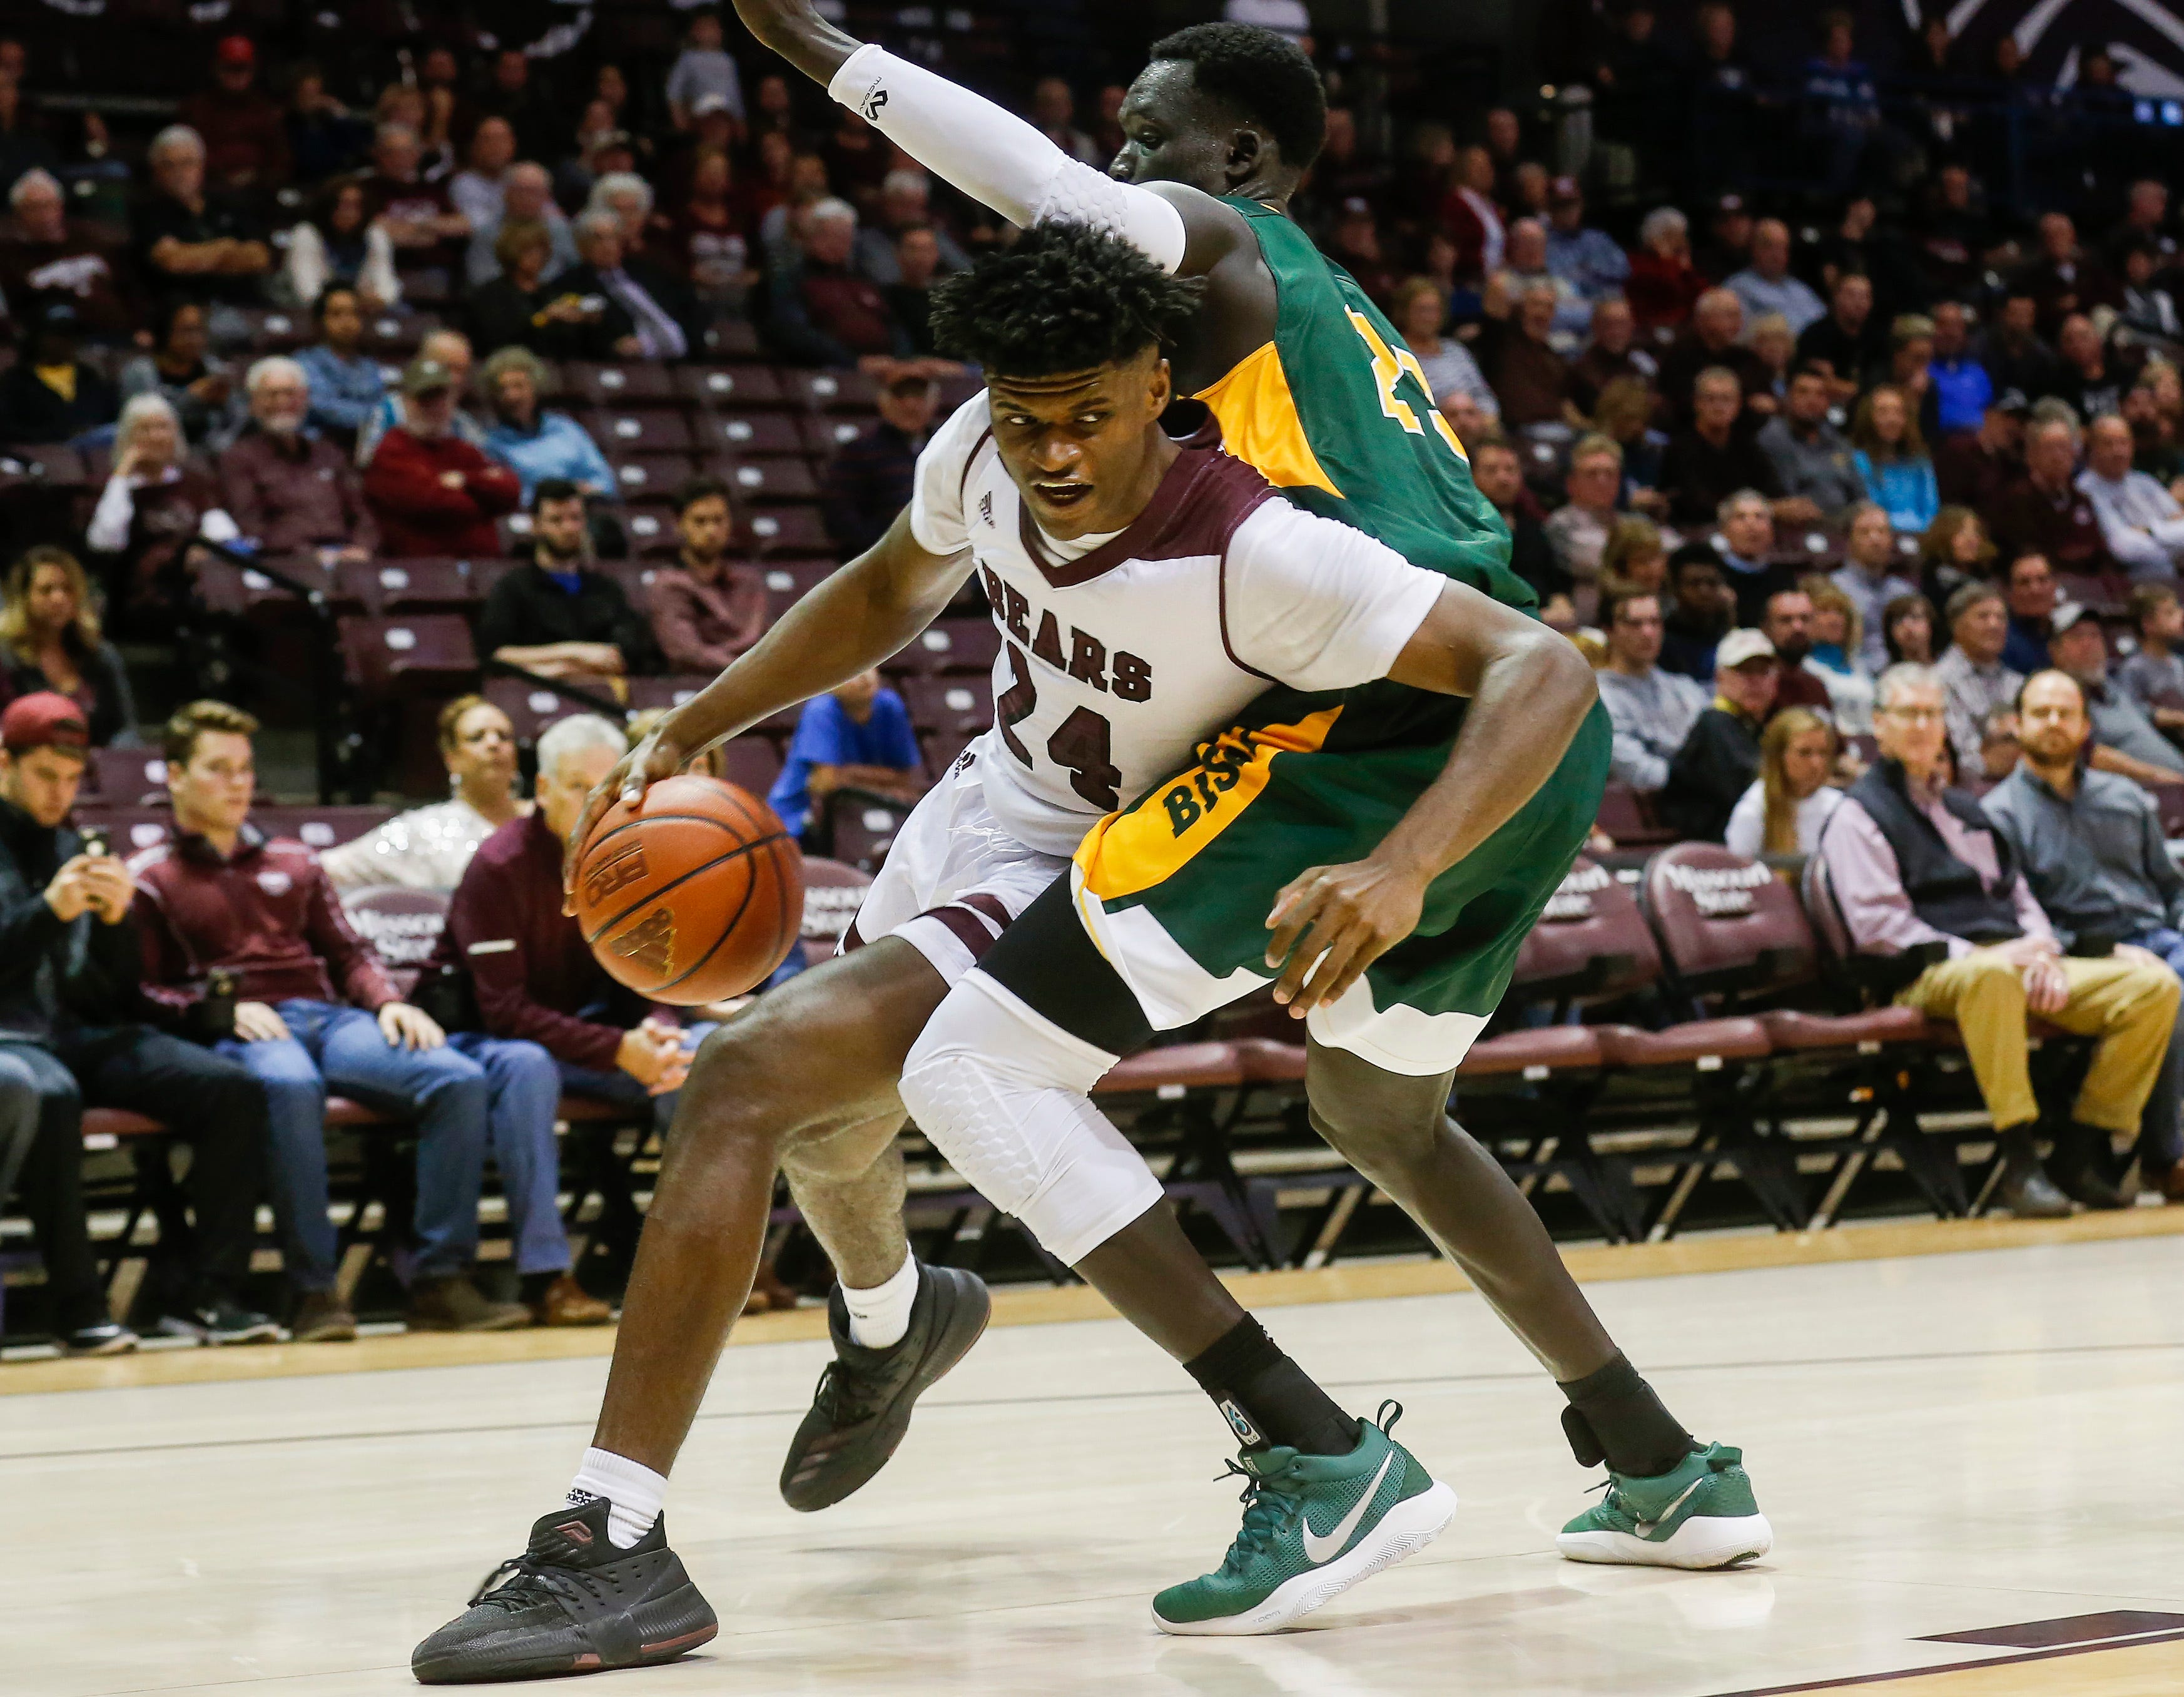 Former Missouri State player Alize Johnson earned first-team All-Missouri Valley Conference honors and MVC Newcomer of the Year during his career at MSU.